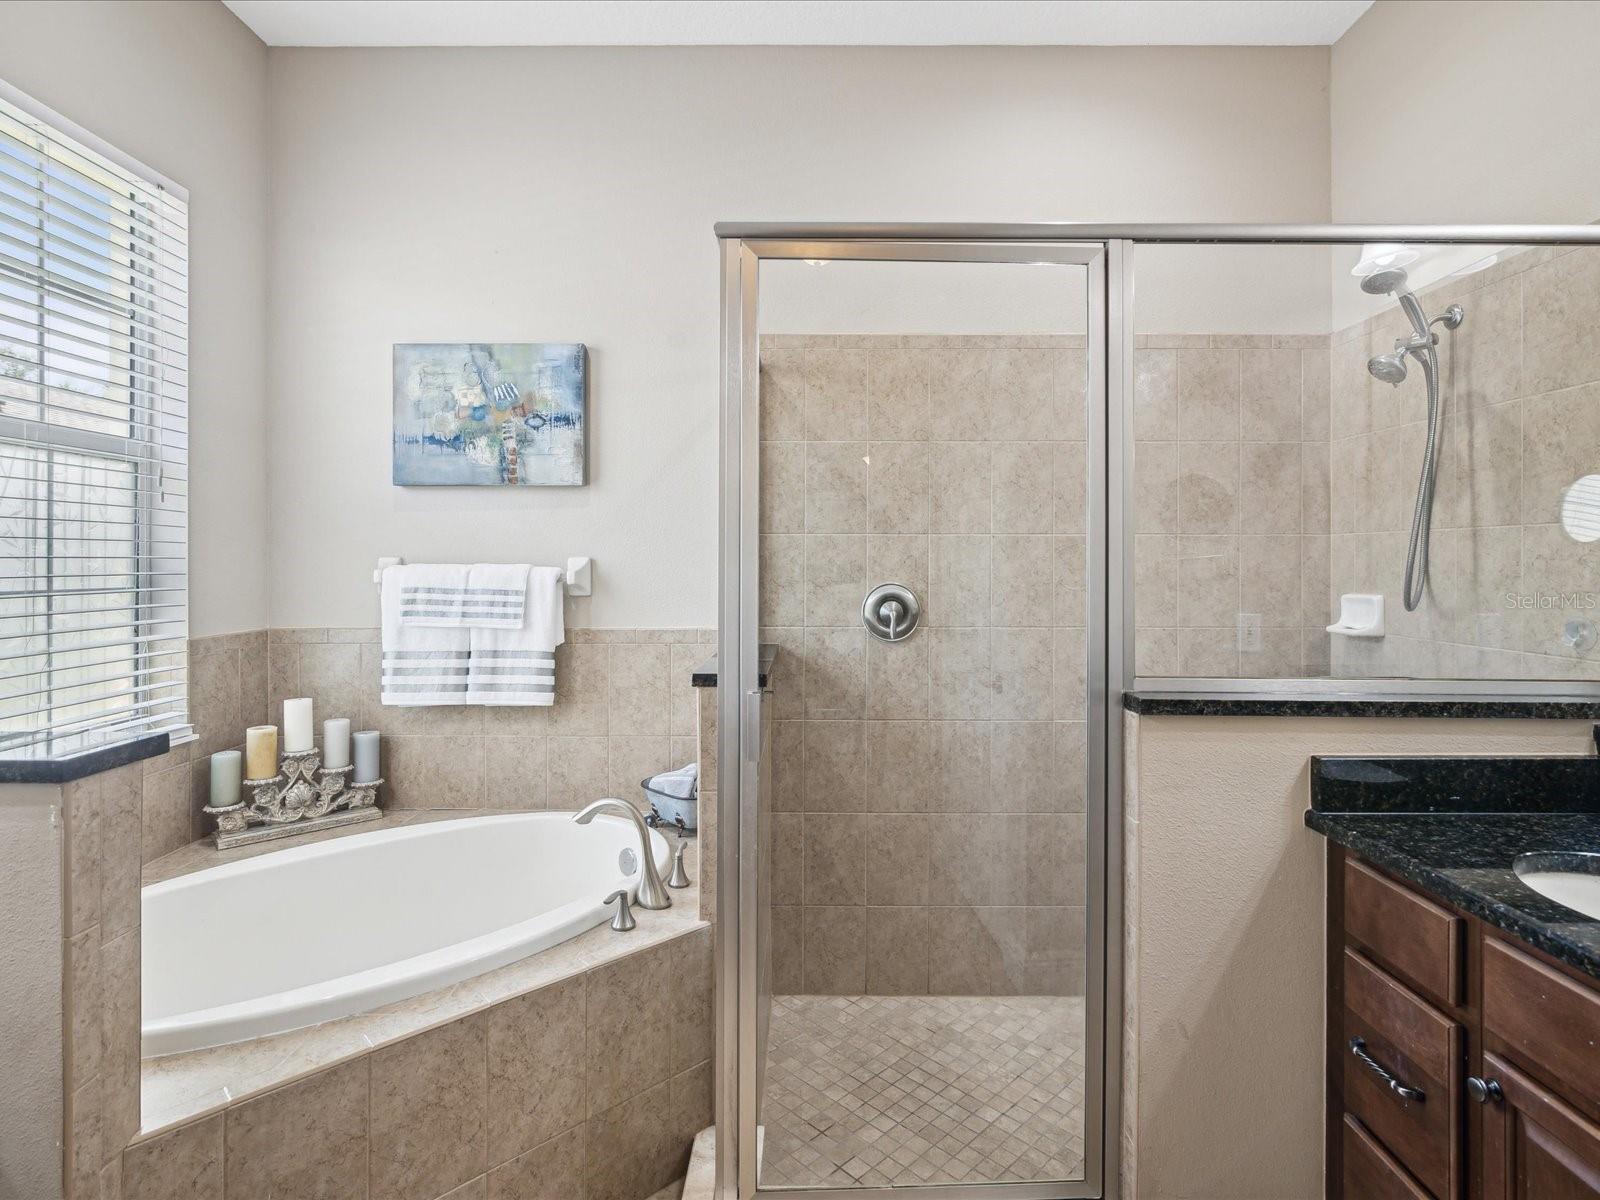 The ensuite bathroom features a luxurious soaking tub, and a walk -in framed glass shower.